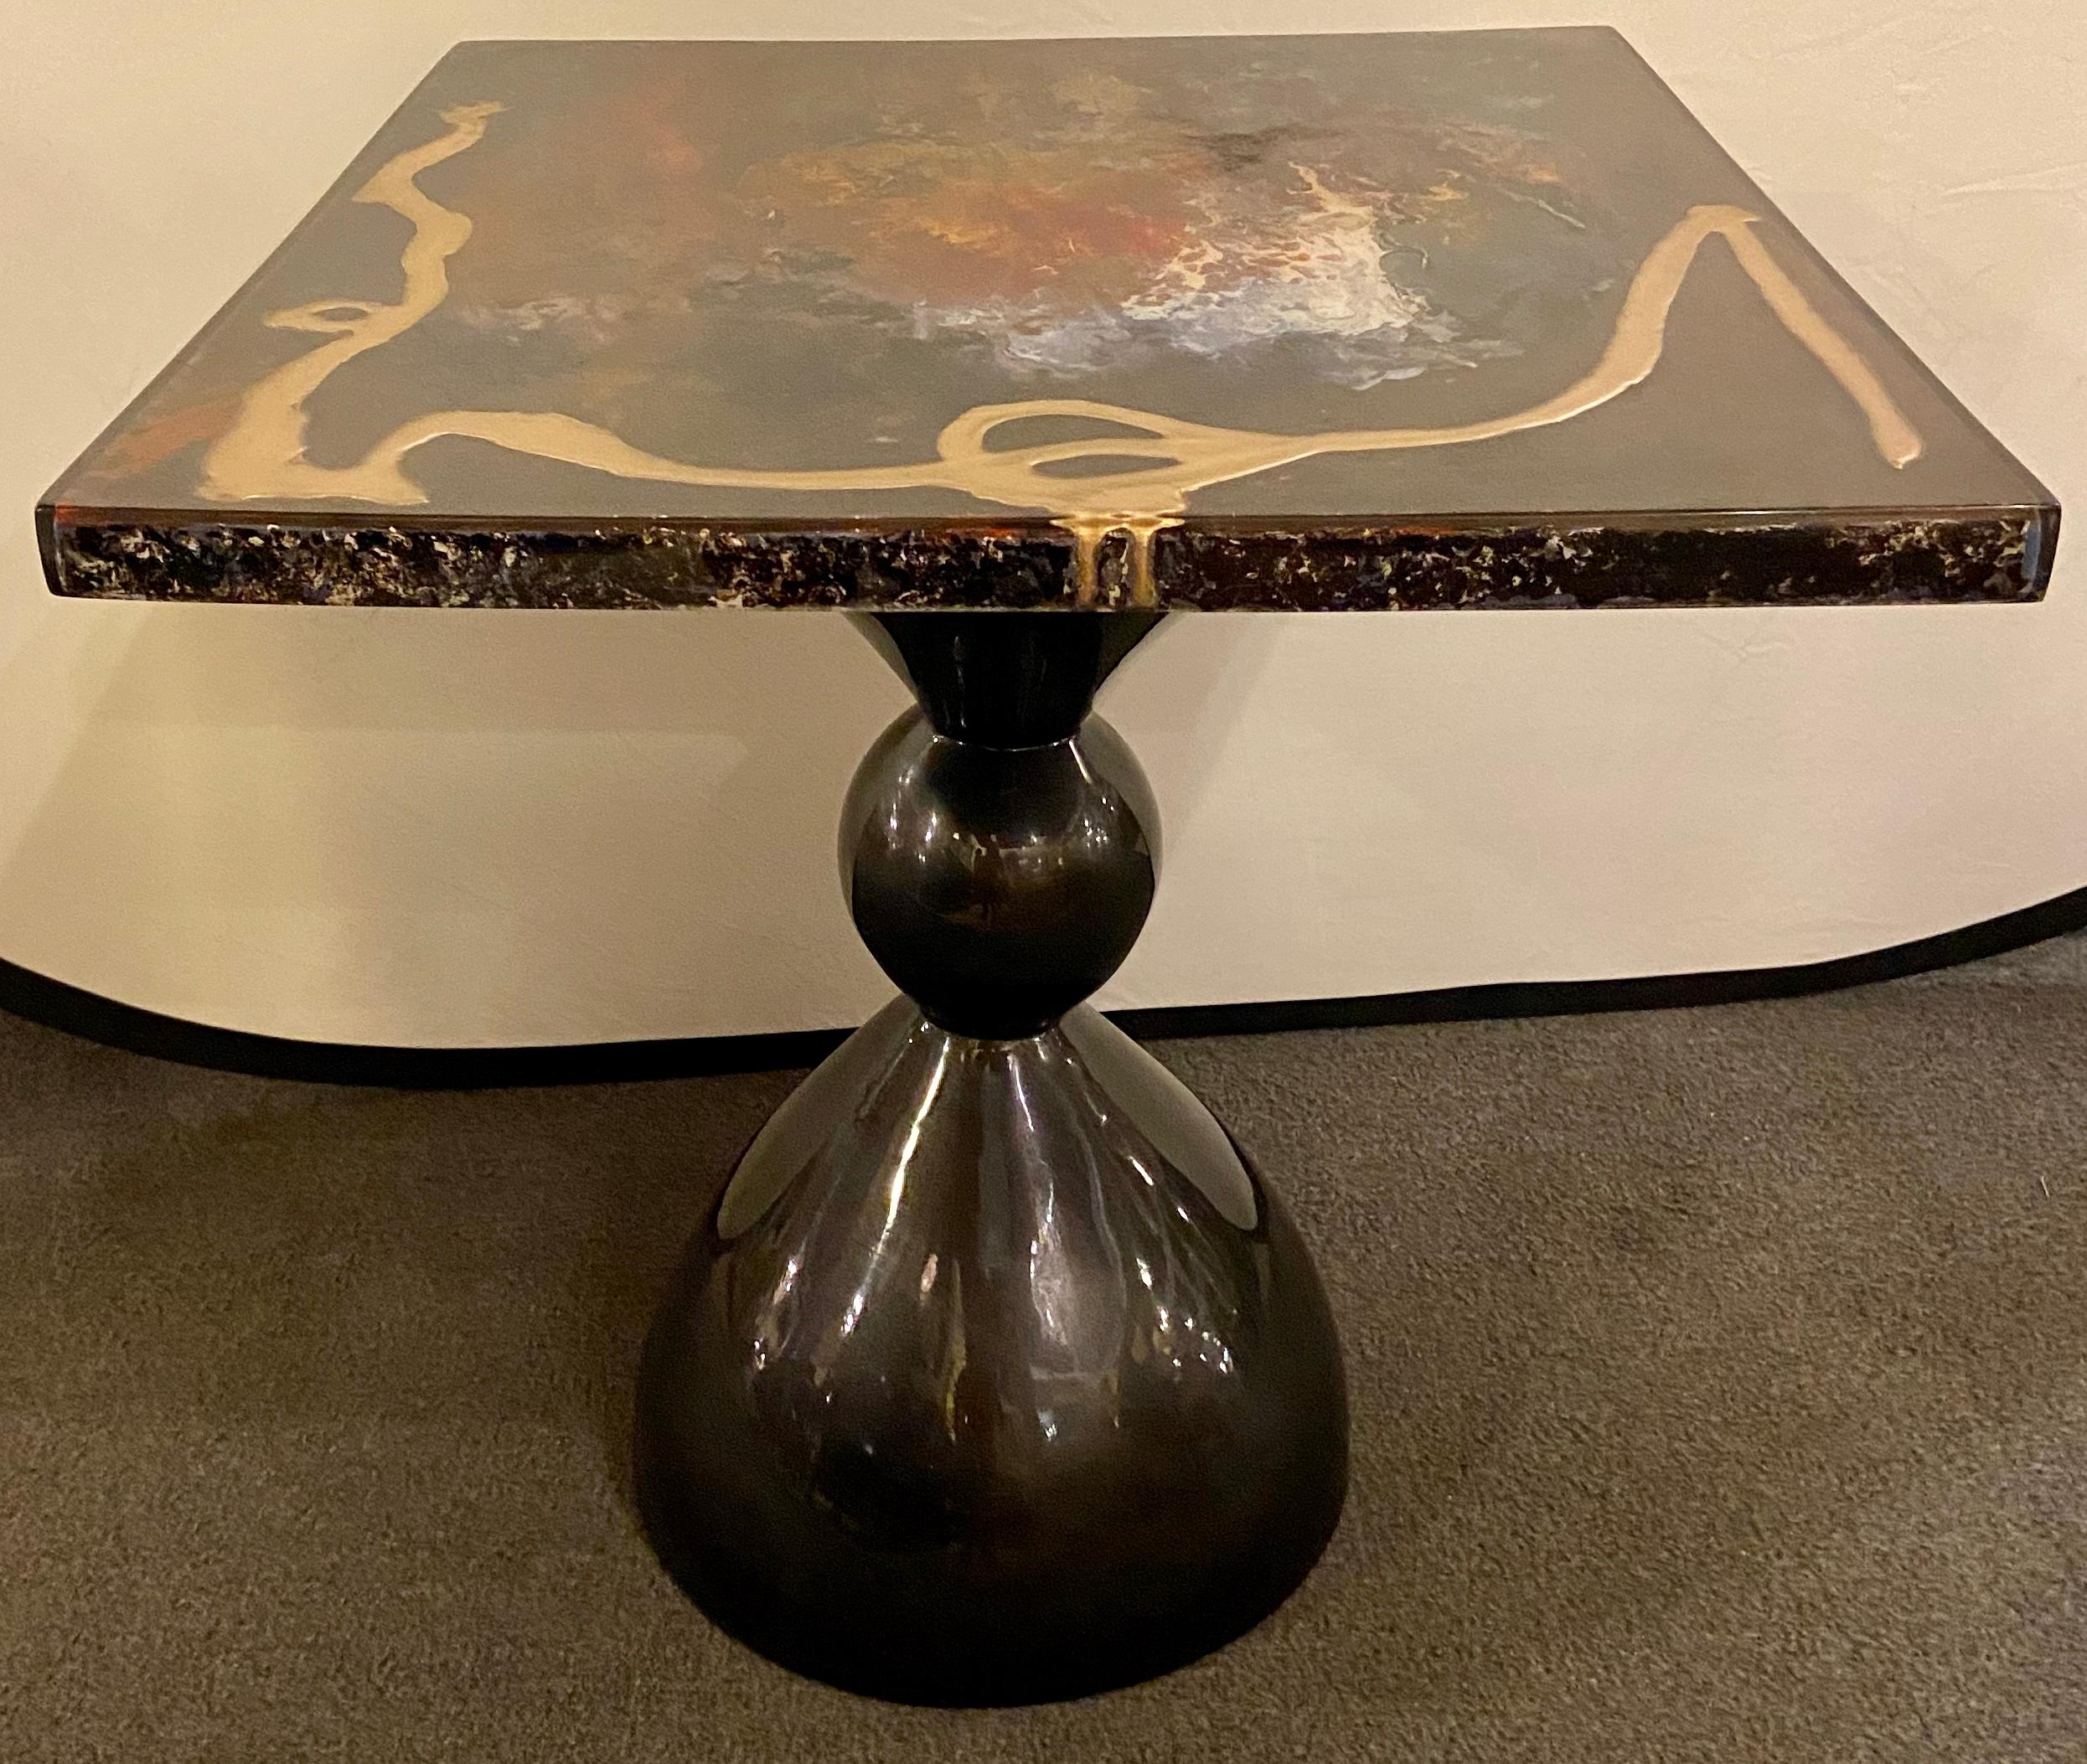 Abstract Design Mid-Century Modern Center or End Table in Resin on Black Epoxy

The square shaped center or end table is assembled to create a unique blent of modern art and abstract design. Using multi-color resin design on black epoxy, the